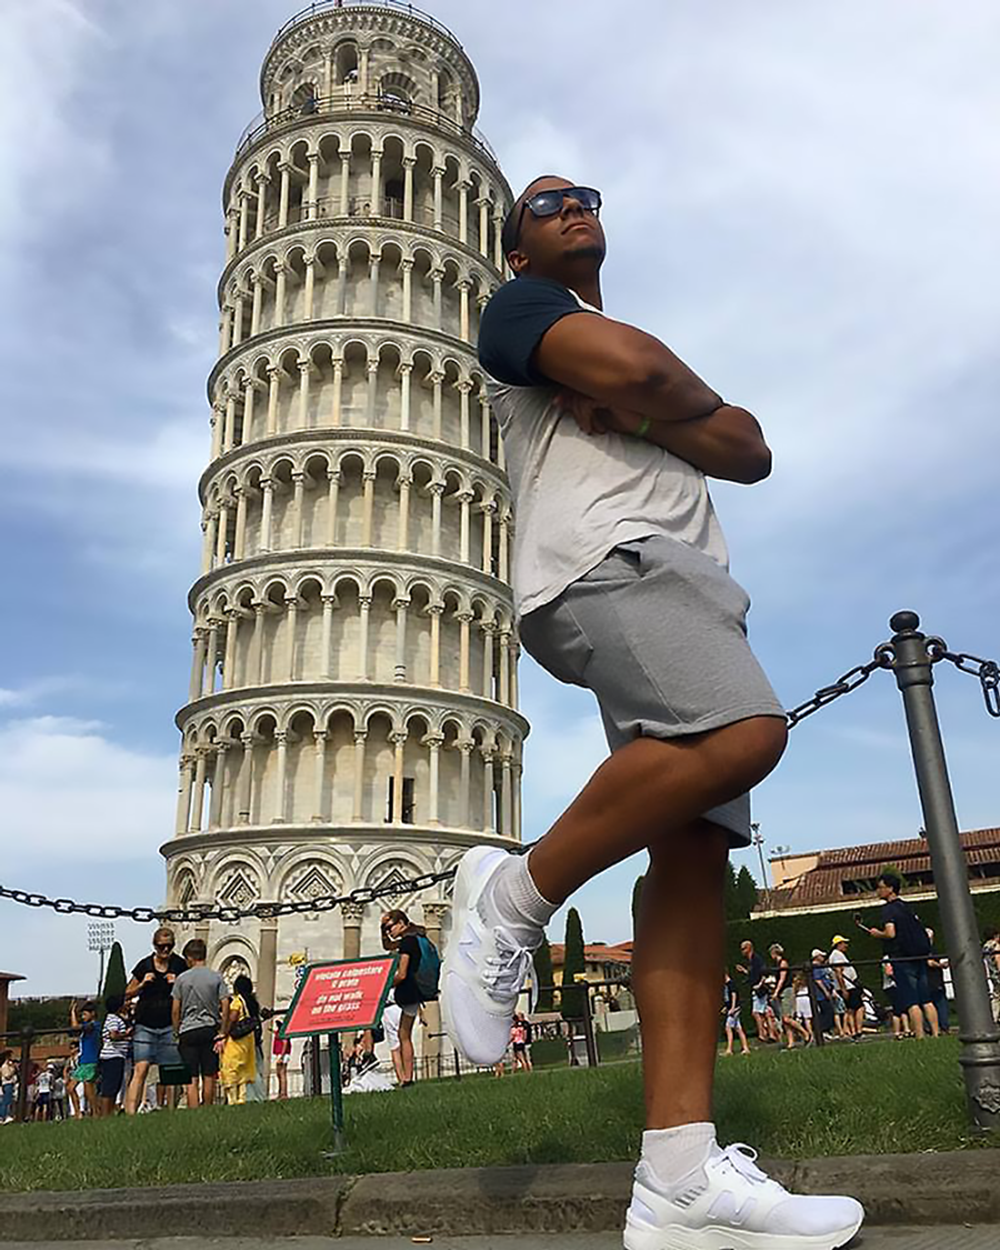 Austin with Leaning Tower